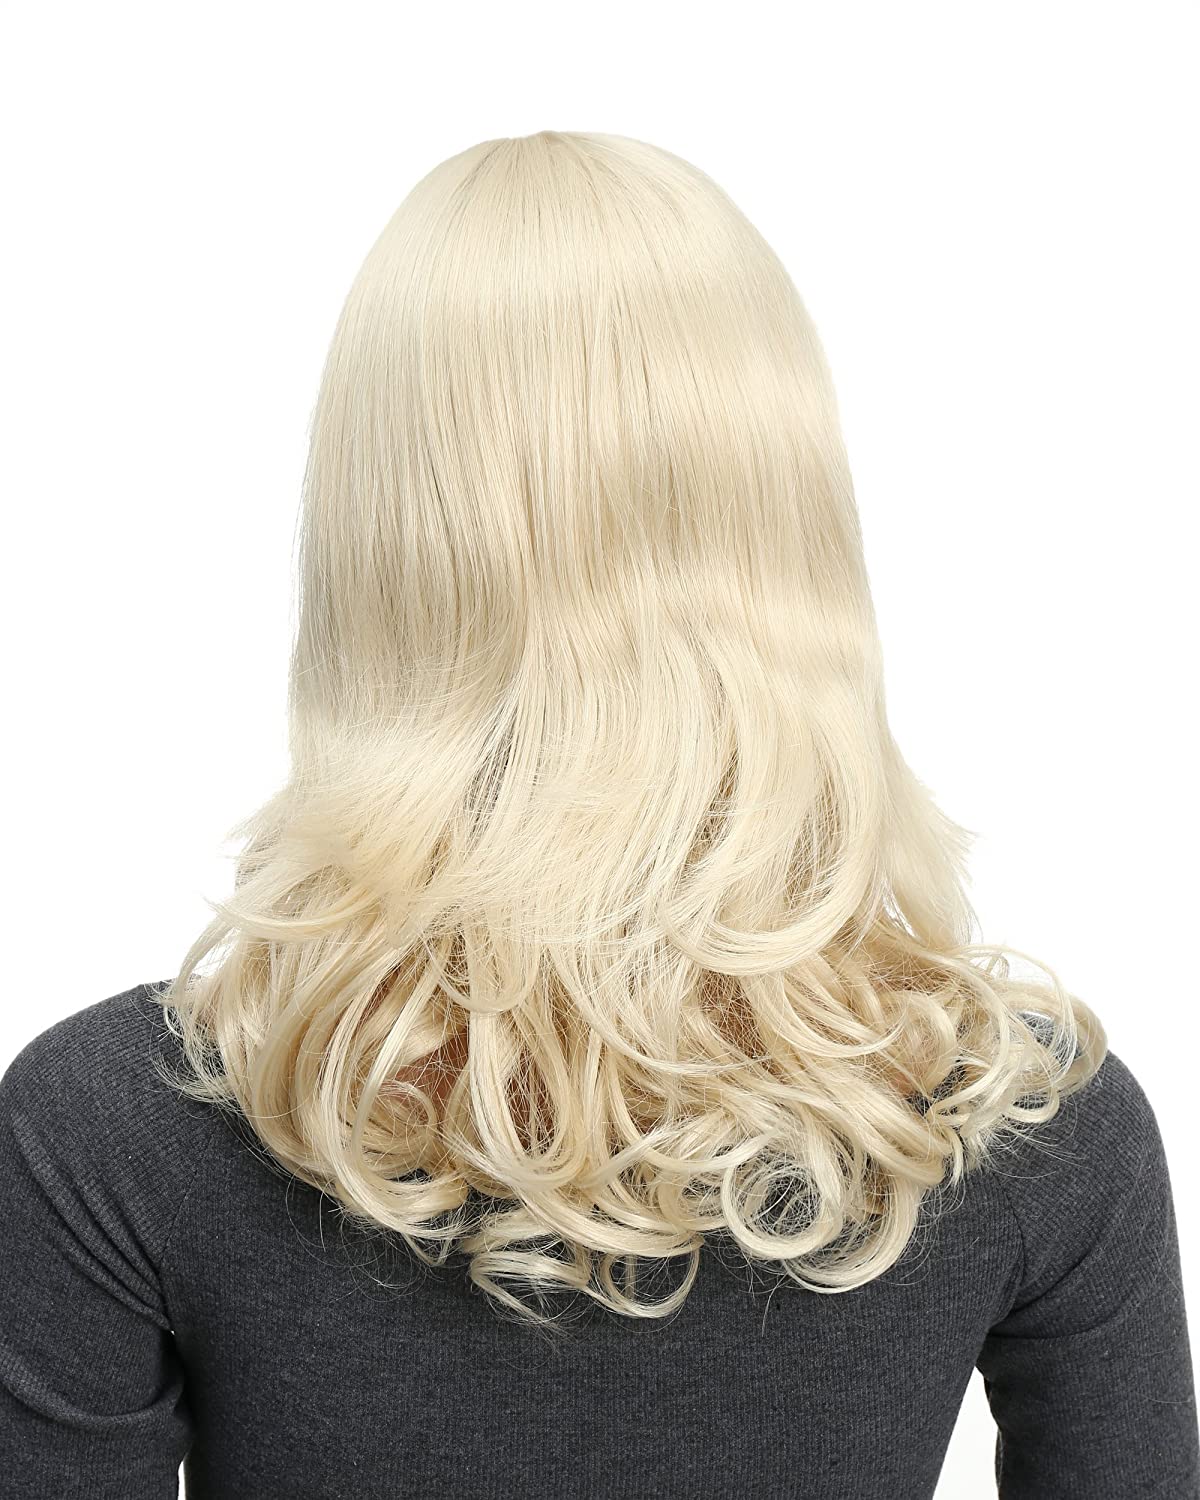 Onedor Full Head Beautiful Long Curly Wave Stunning Wig Charming Curly Costume Wigs with Fringe (pale blonde) - image 3 of 6